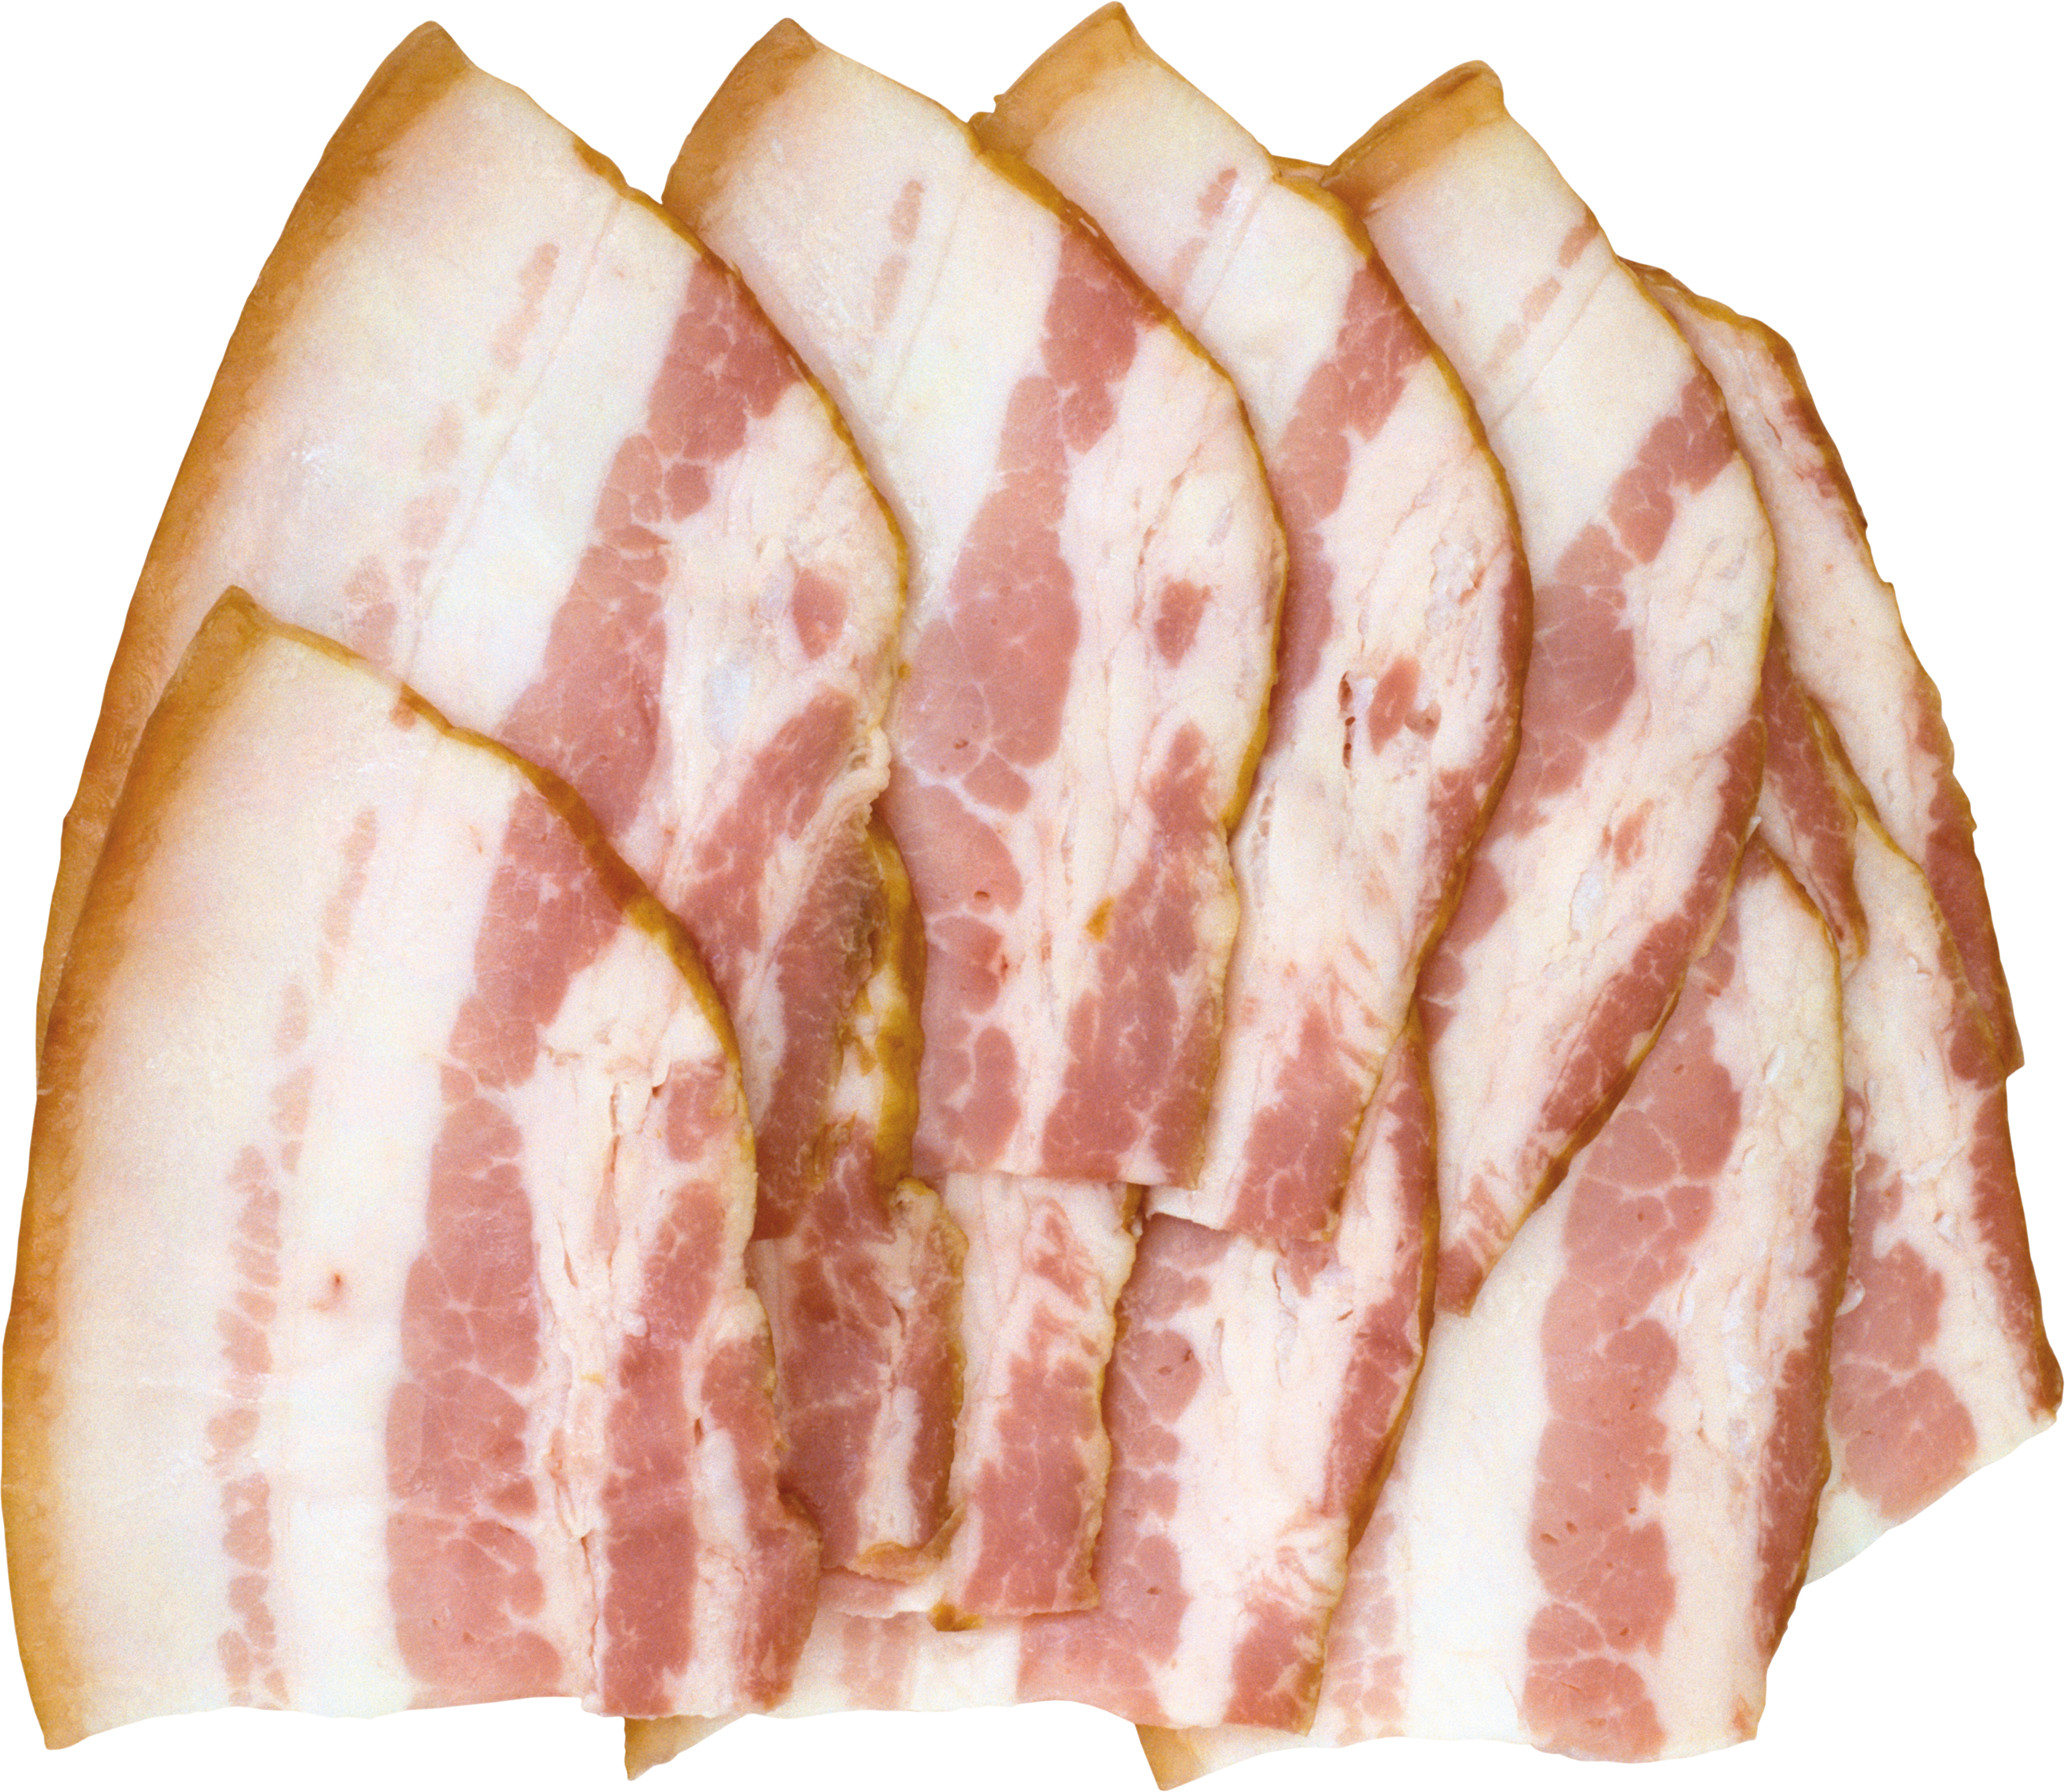 Bacon Png - Bacon, Transparent background PNG HD thumbnail